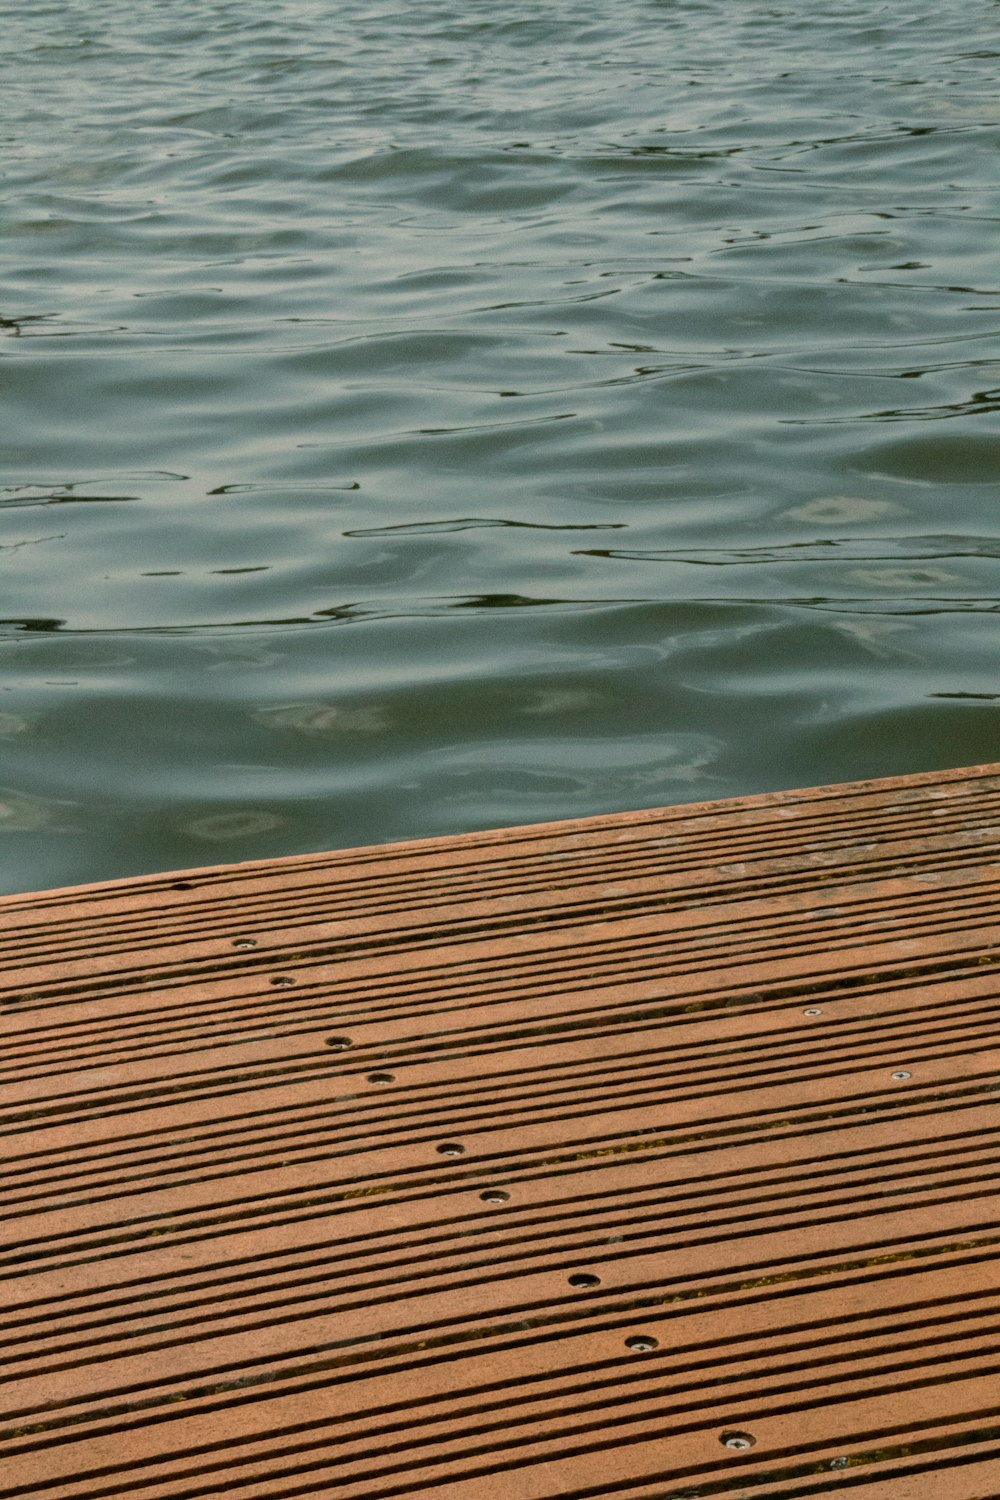 a bird standing on a wooden dock over a body of water